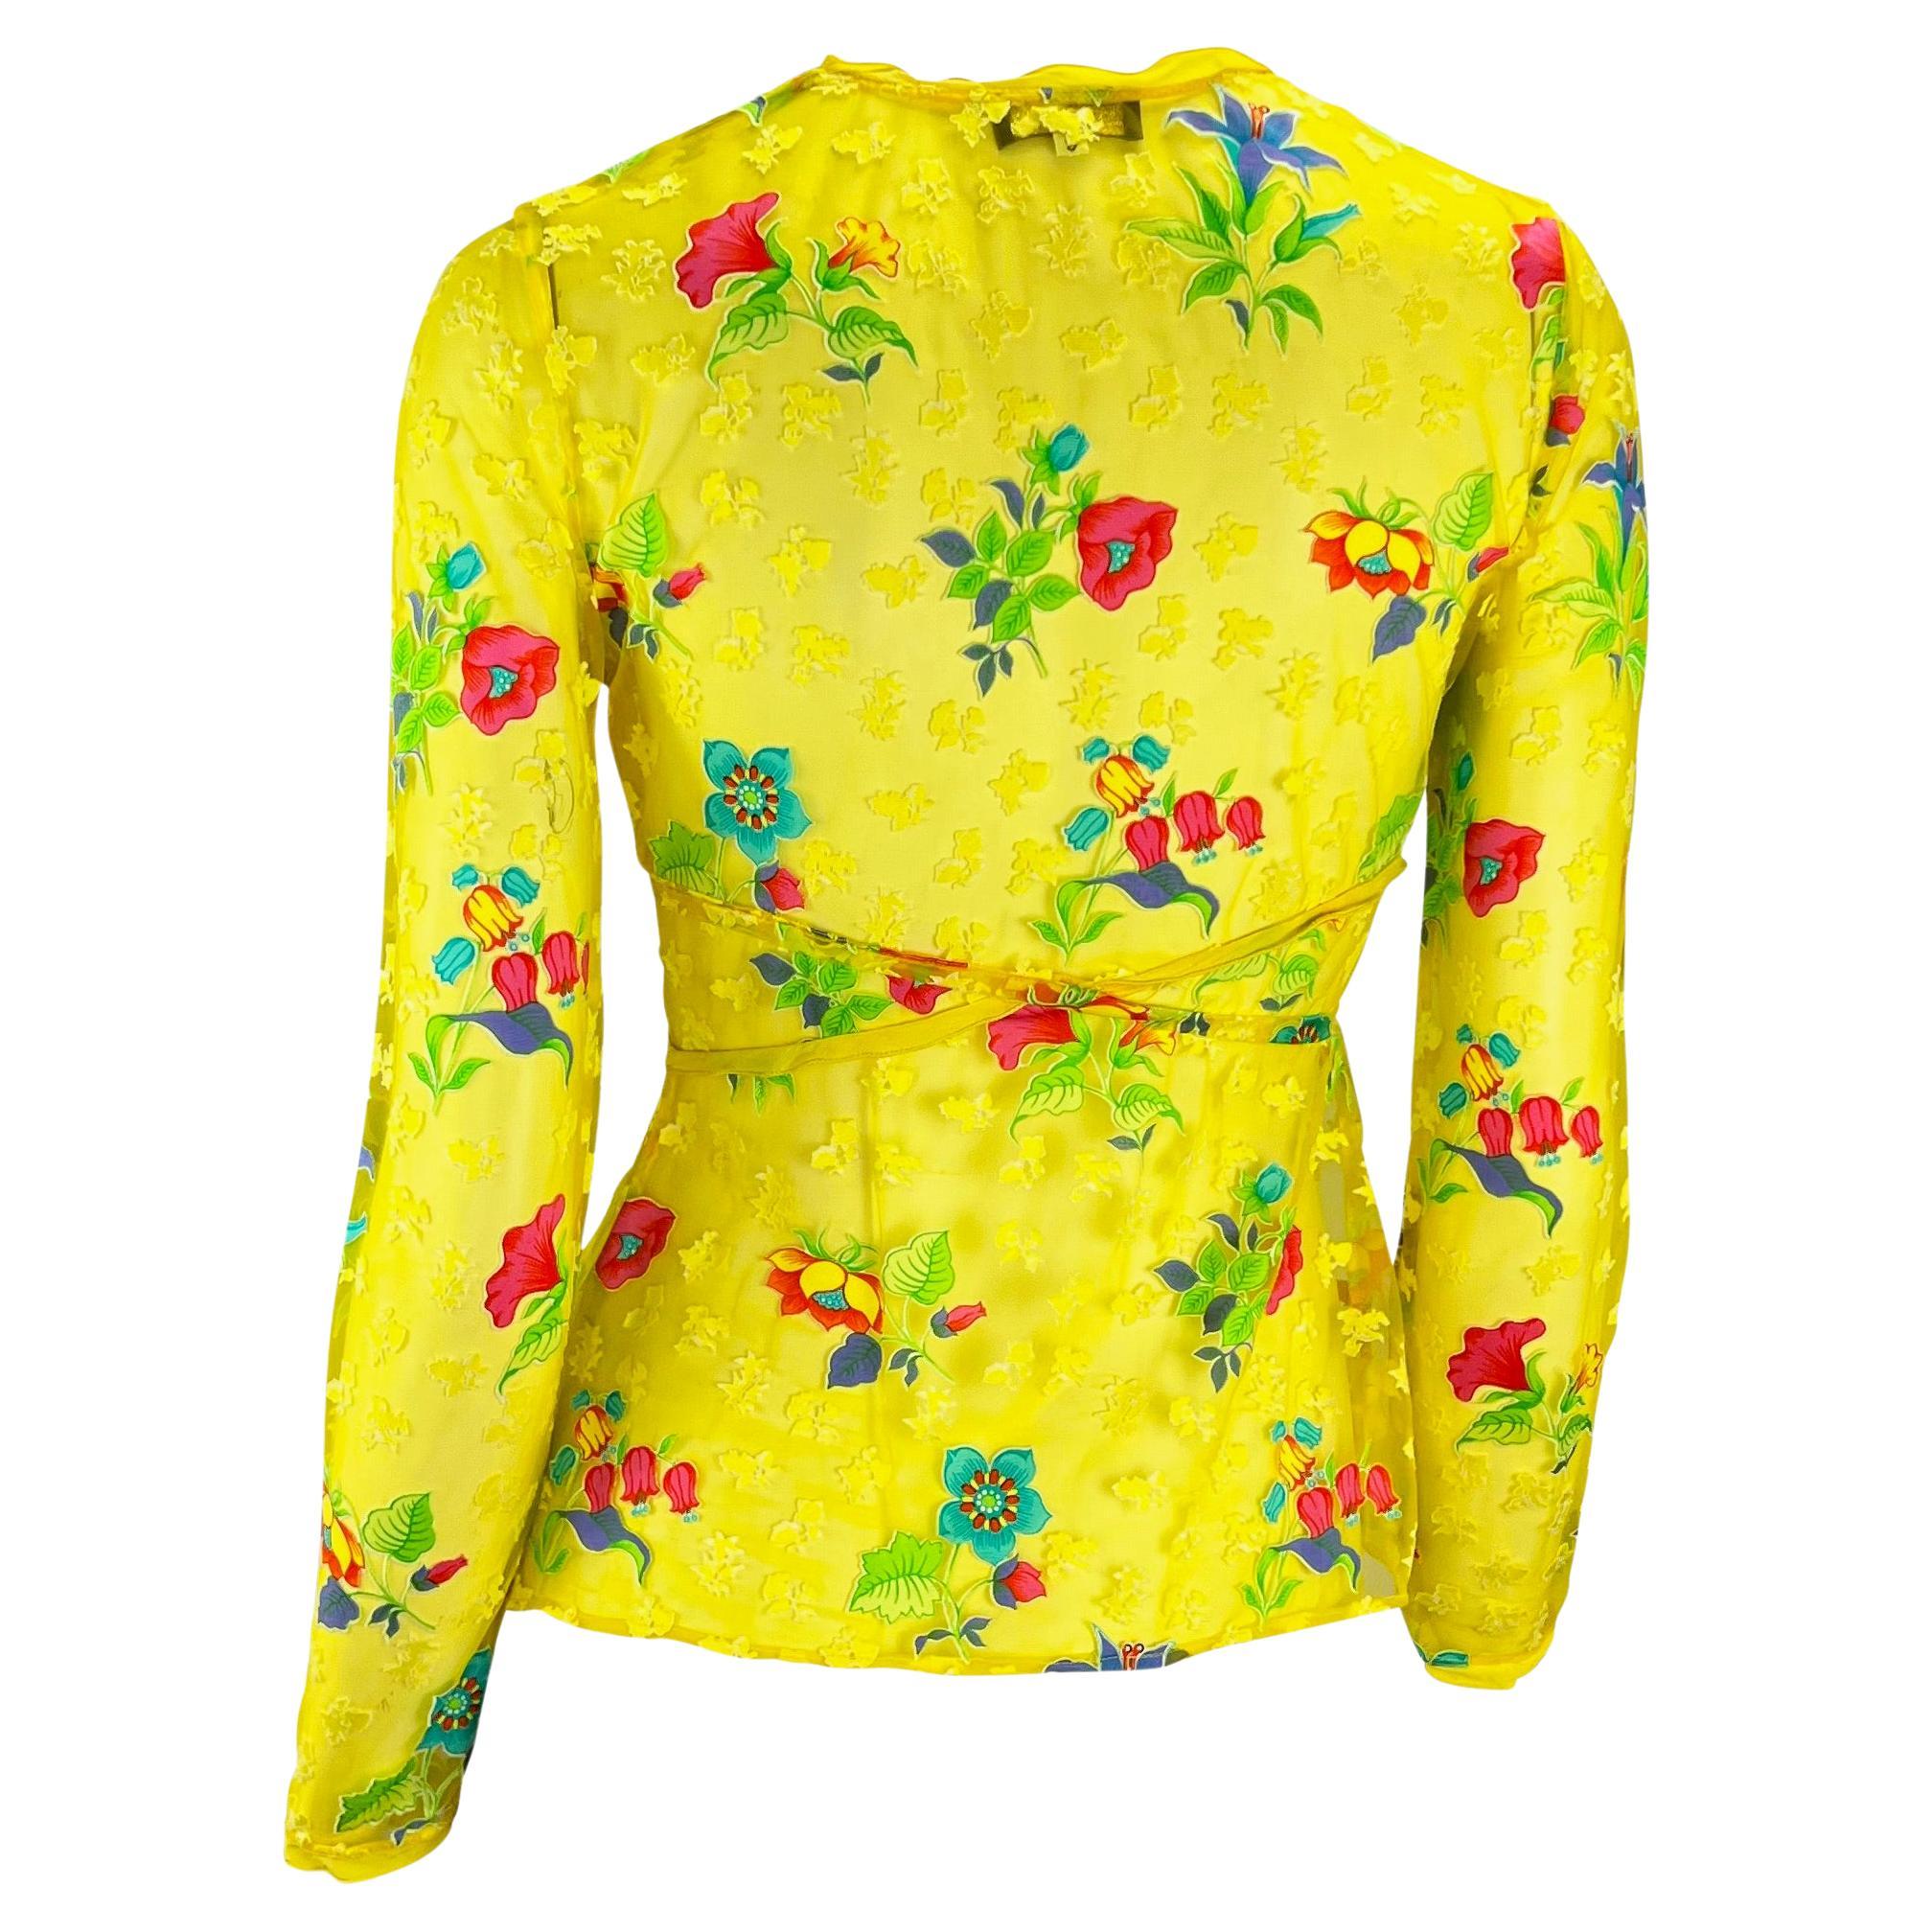 S/S 1997 Gianni Versace Couture Runway Sheer Yellow Floral Button Plunge Top 2